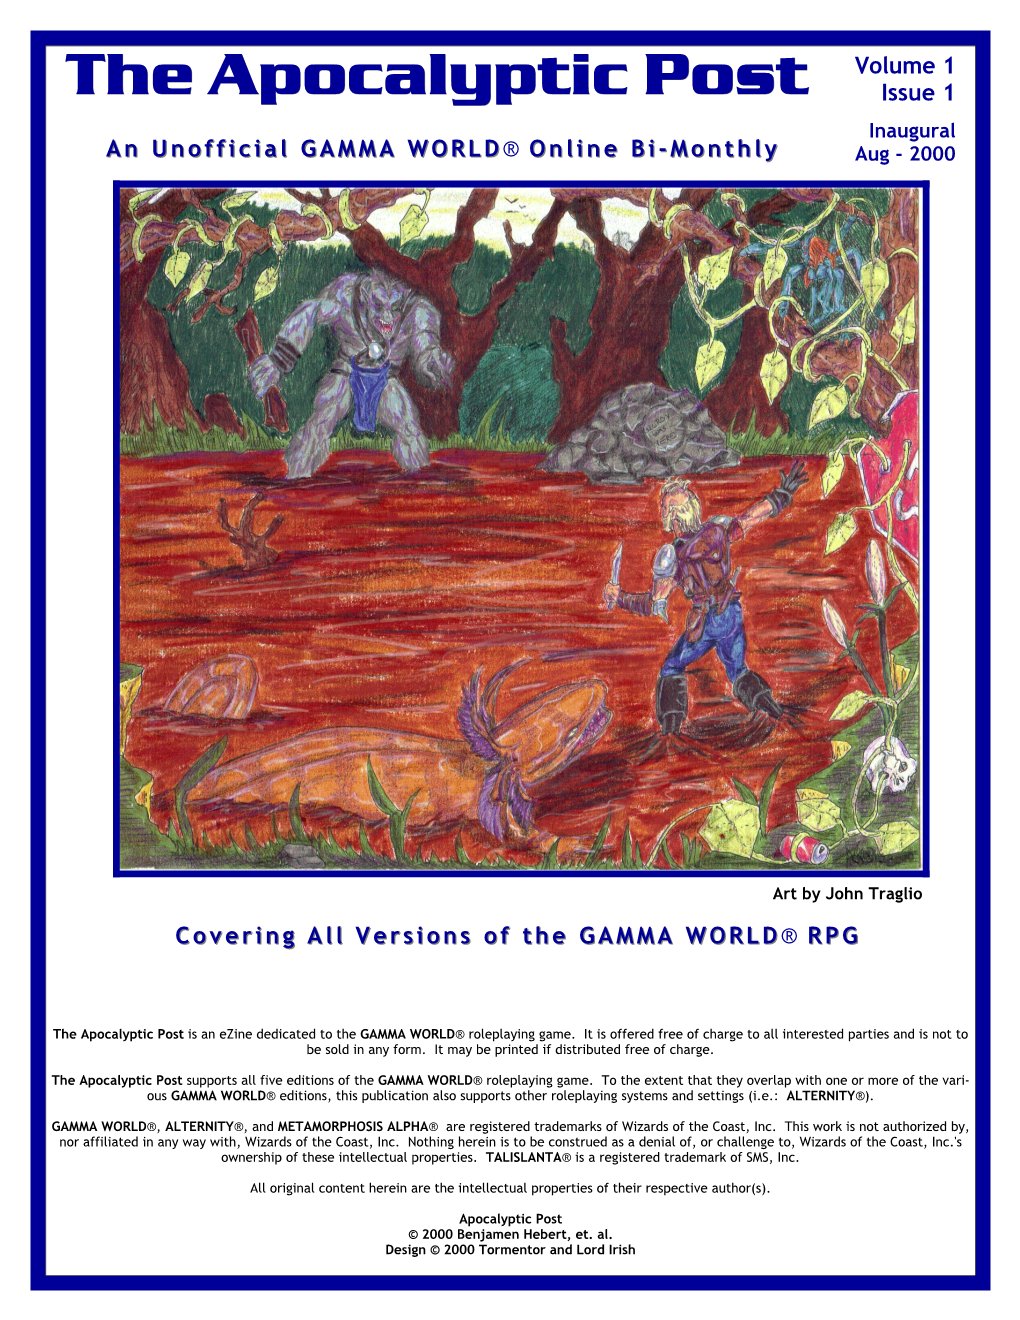 The Apocalyptic Post Issue 1 Inaugural an Unofficial GAMMA WORLD® Online Bi-Monthly Aug - 2000